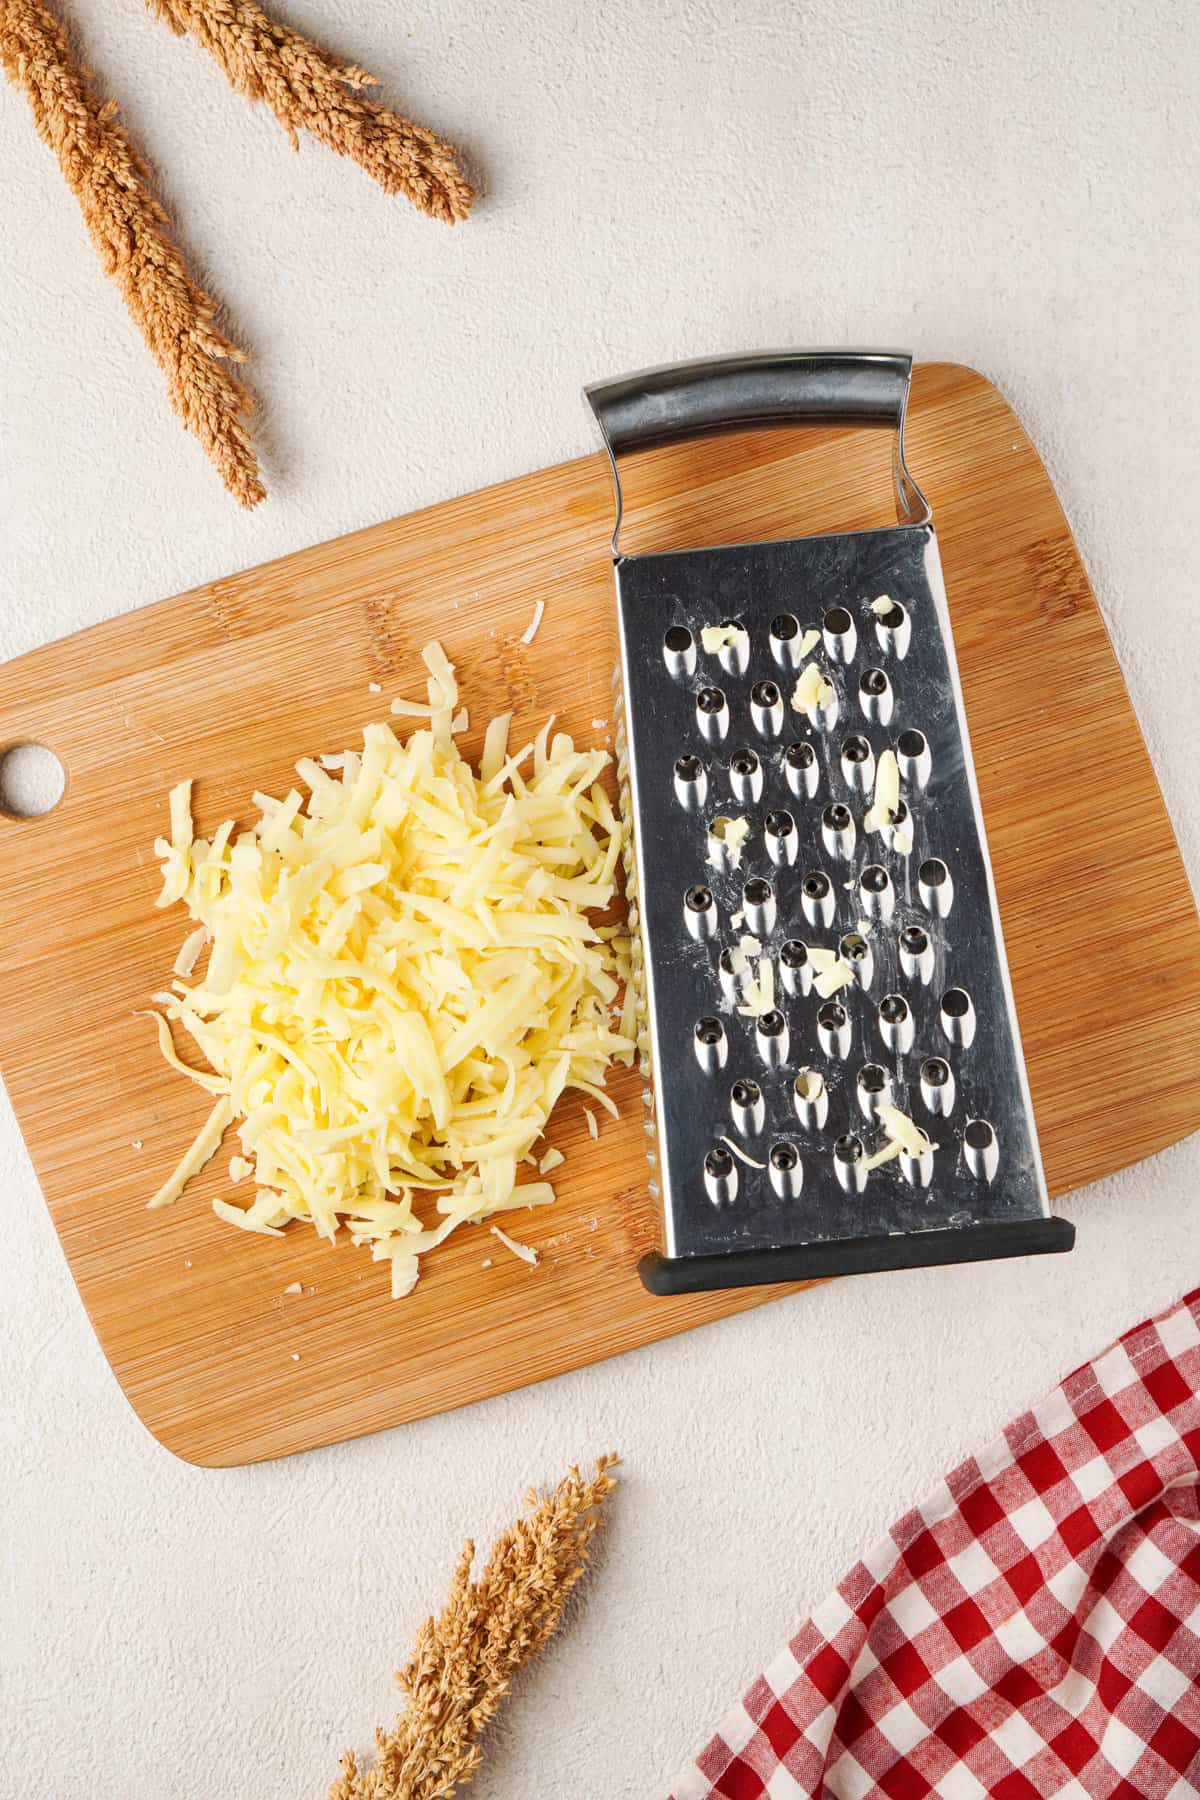 Overhead view showing a box grater and shredded butter on a wooden cutting board.